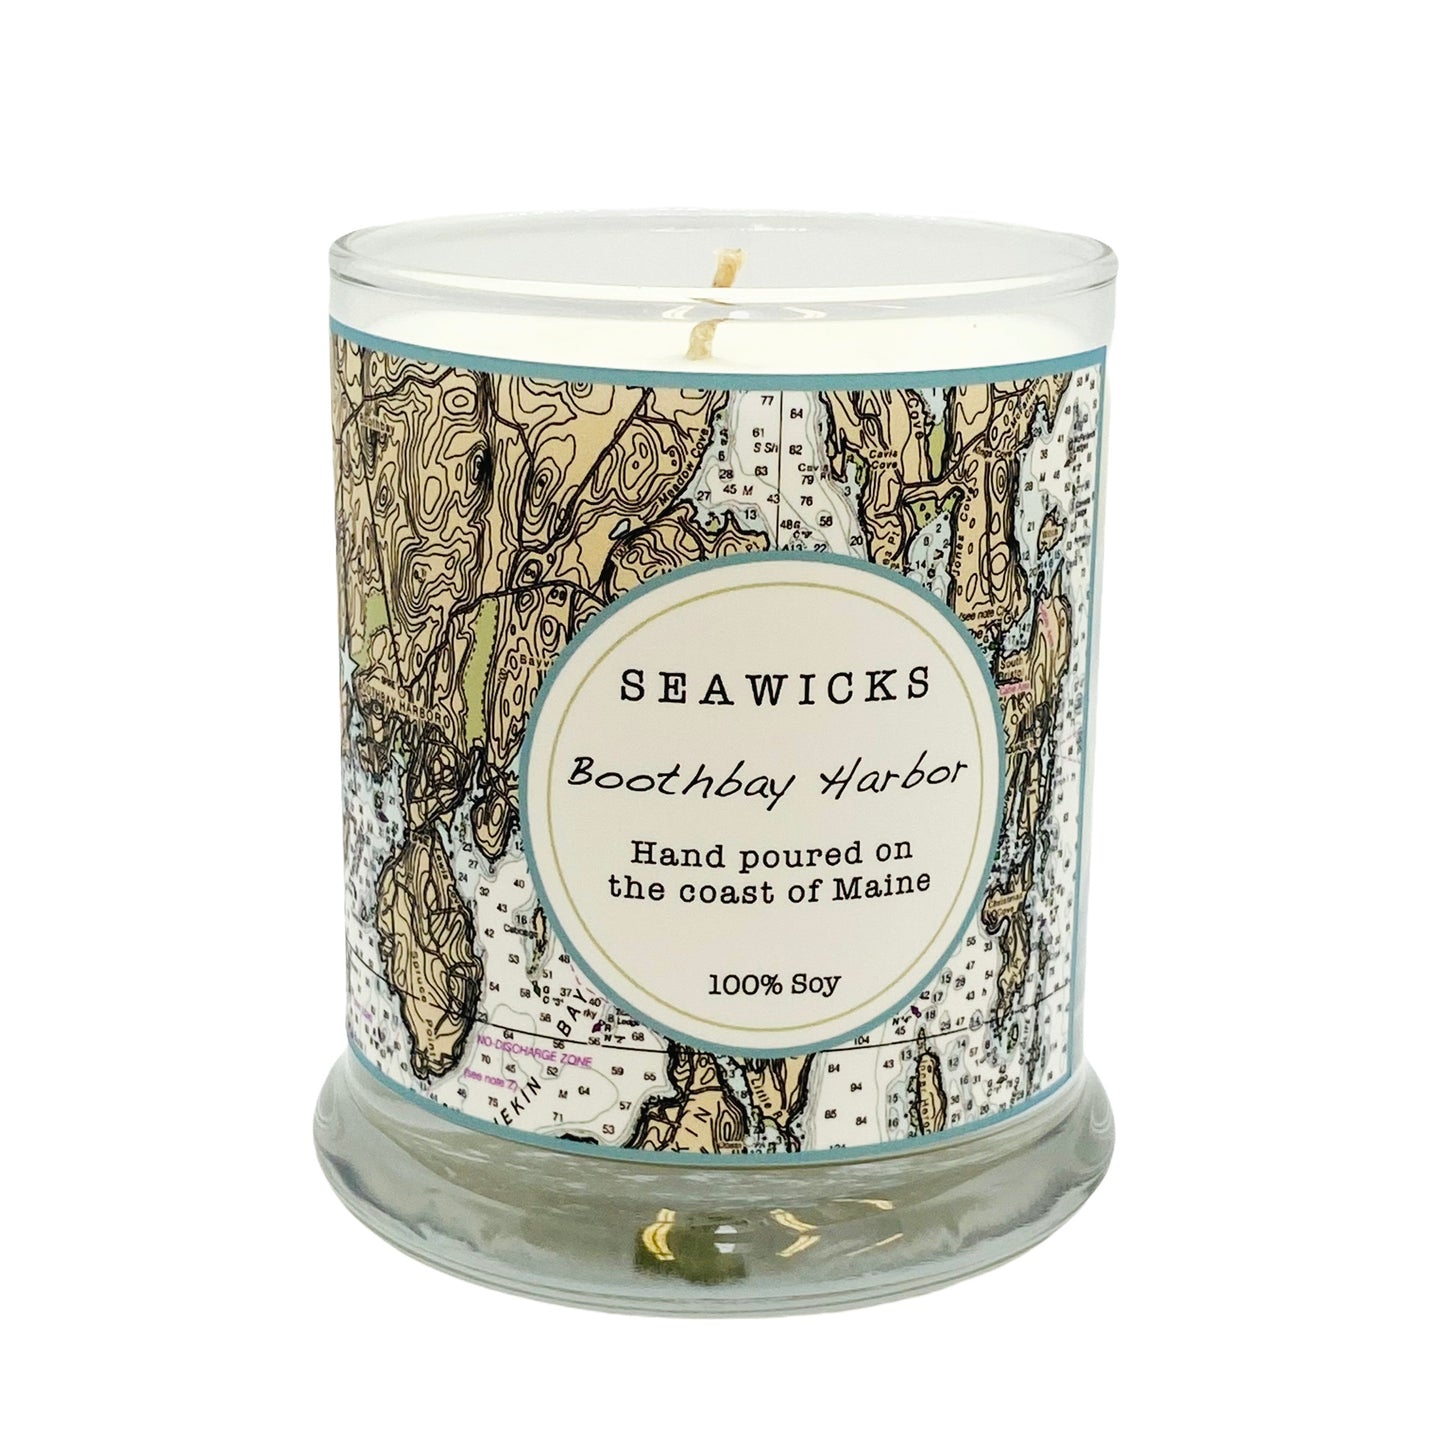 Boothbay Harbor Chart Candle